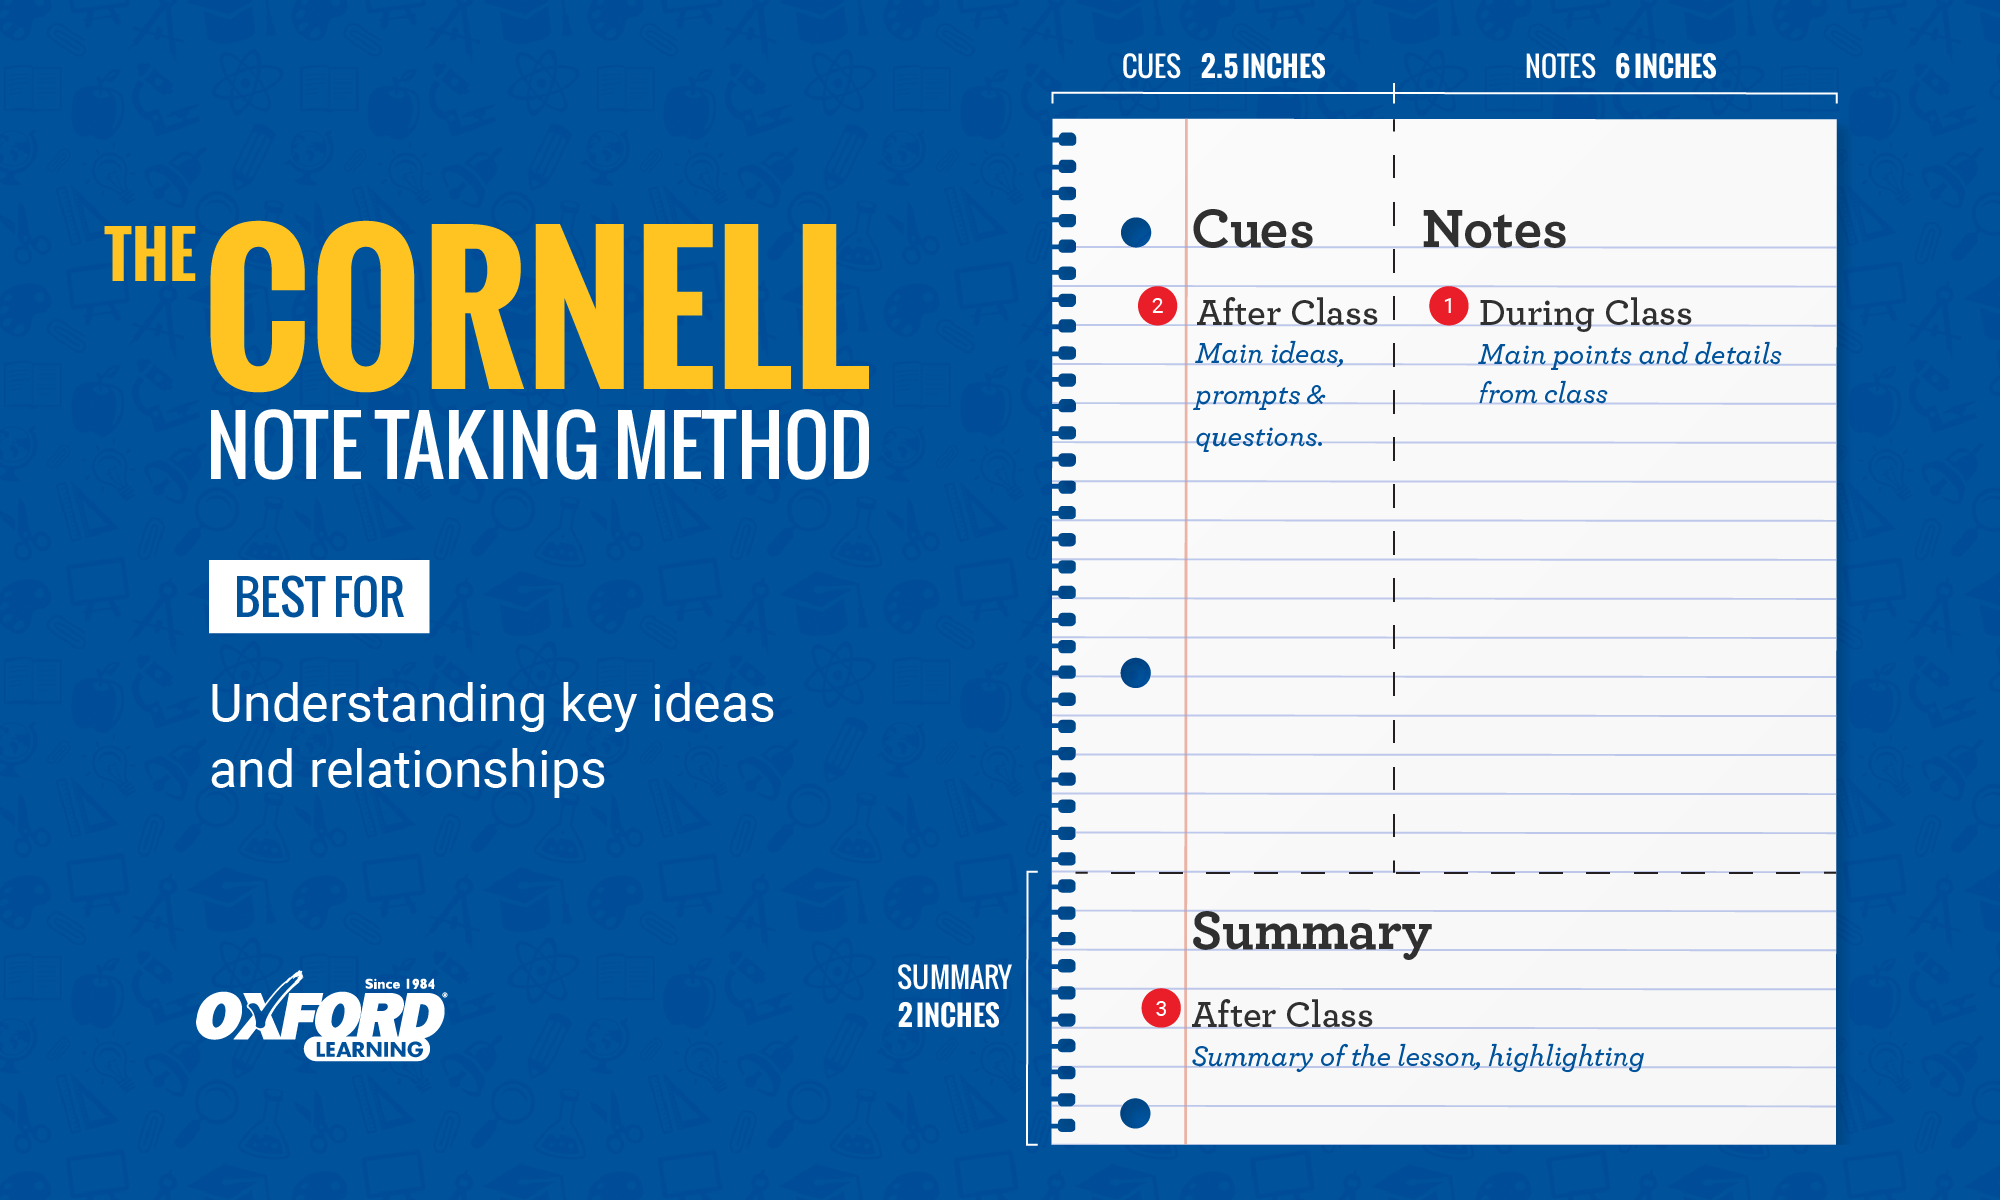 https://www.oxfordlearning.com/wp-content/uploads/2017/05/Note-Taking-Cornell-Method.png